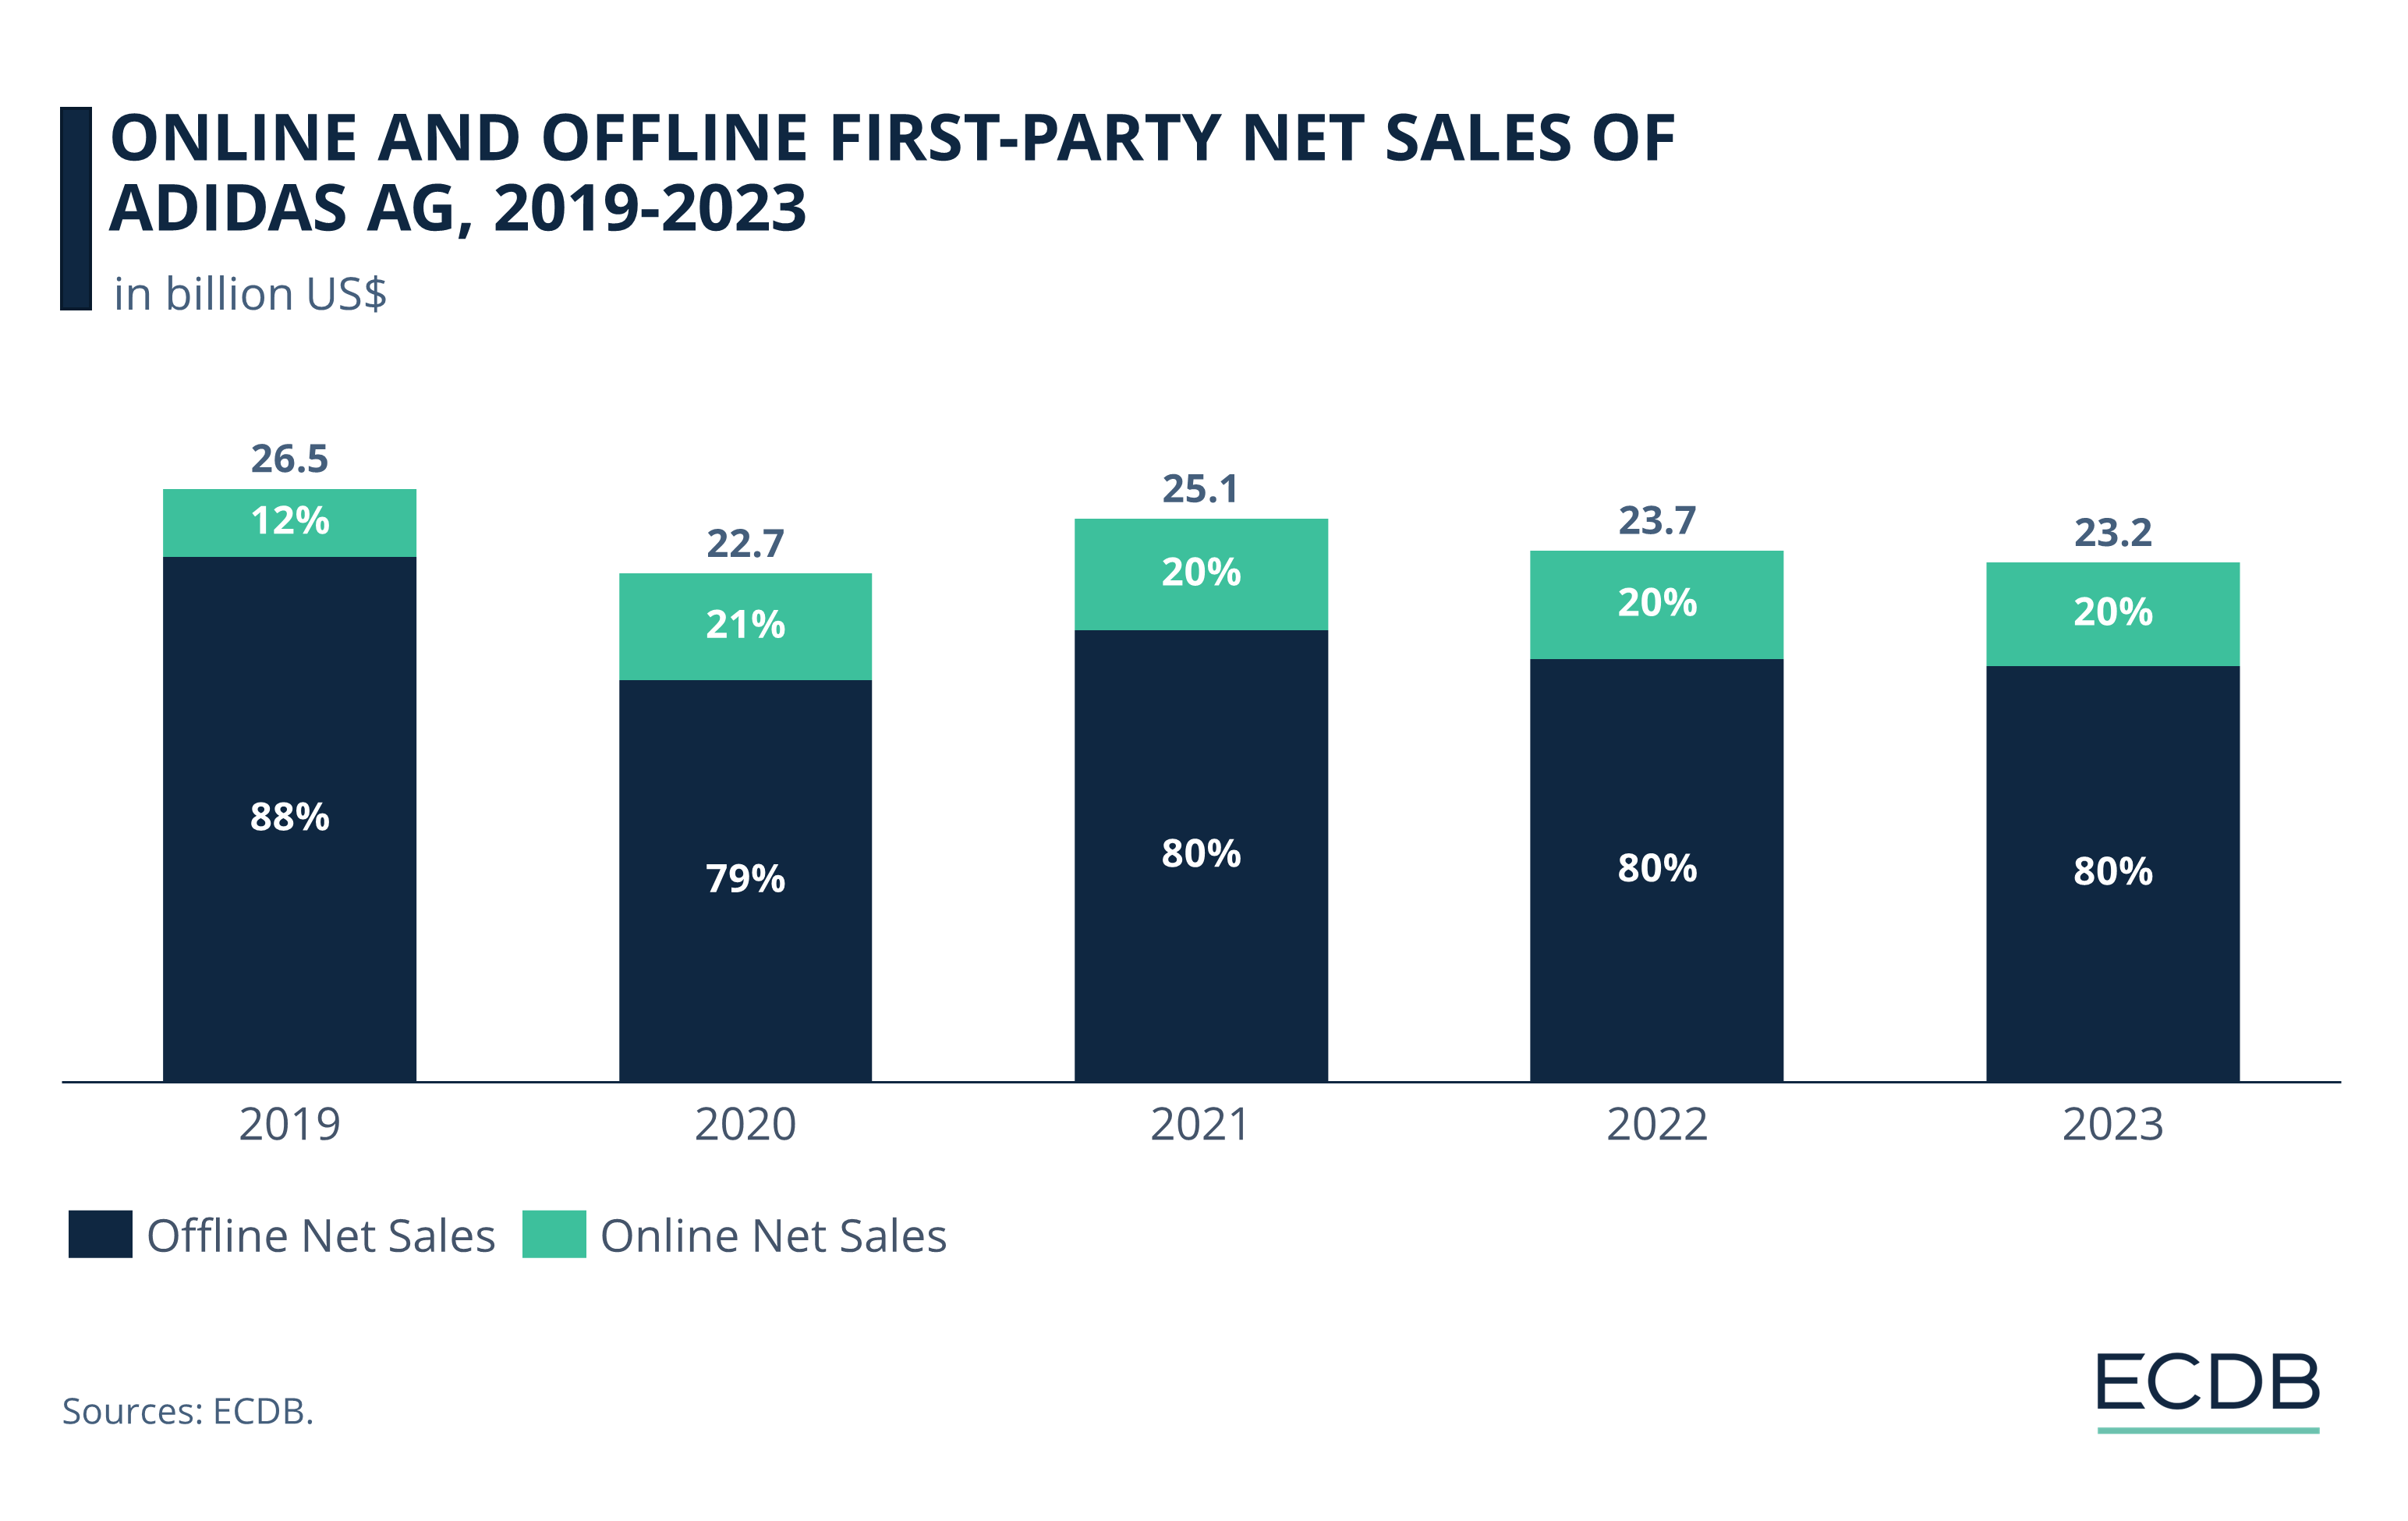 Online and Offline First-Party Net Sales of Adidas AG, 2019-2023